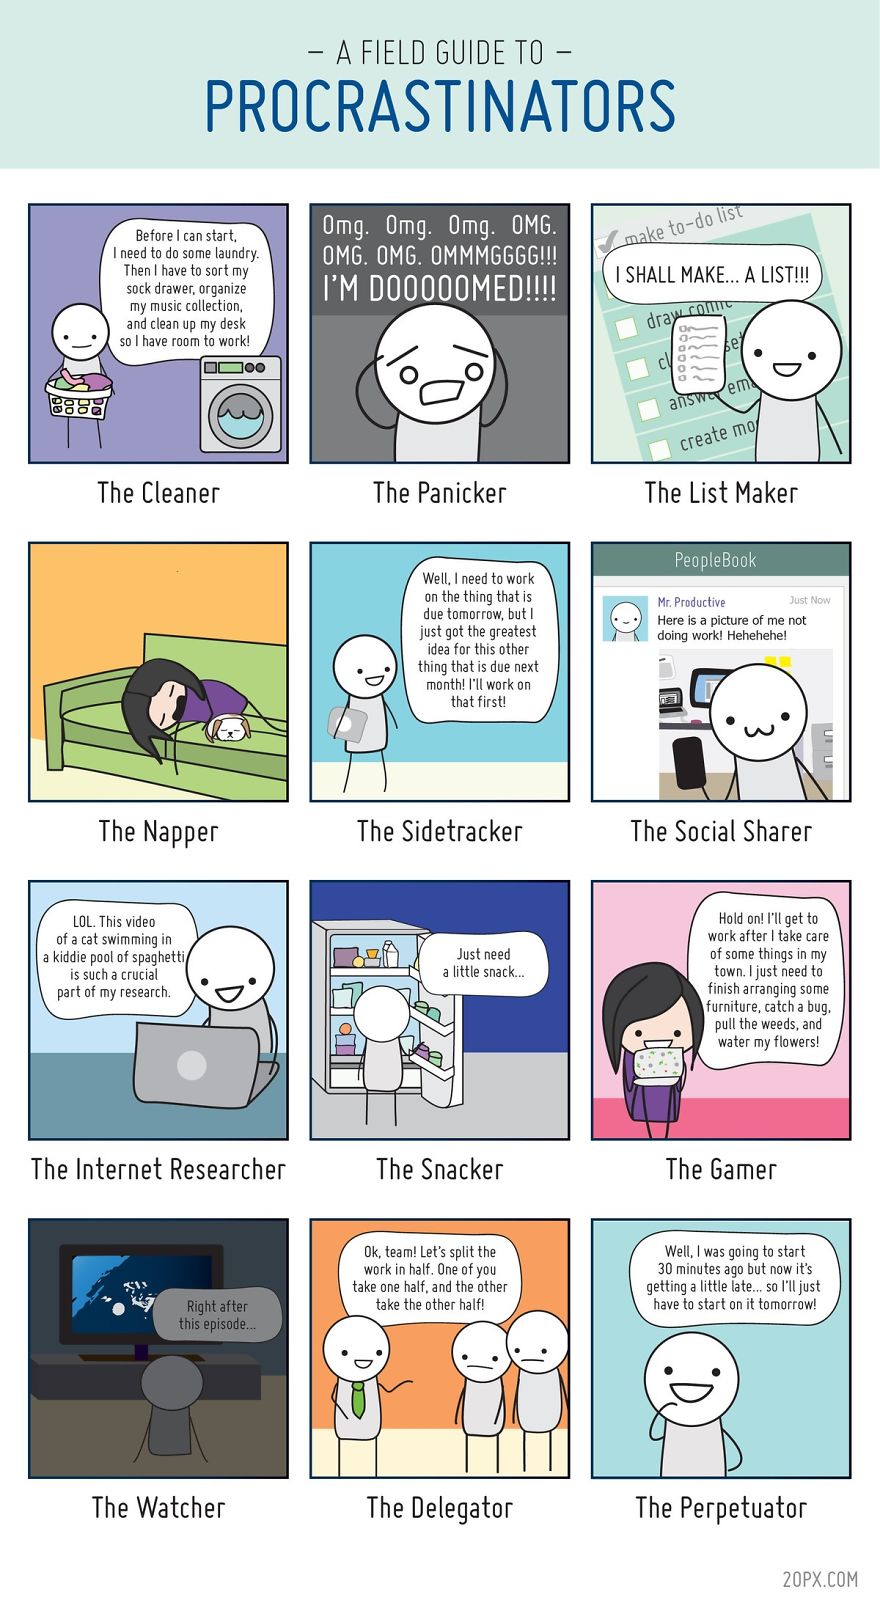 Field Guide to Procrastination by Angela Liao illustrating twelve types of procrastinators:  The Cleaner, The Panicker, The List maker, The Napper, The Sidetracker, The Social Sharer, The Internet Researcher, The Snacker, The Gamer, The Watcher, The Delegator, The Perpetuator